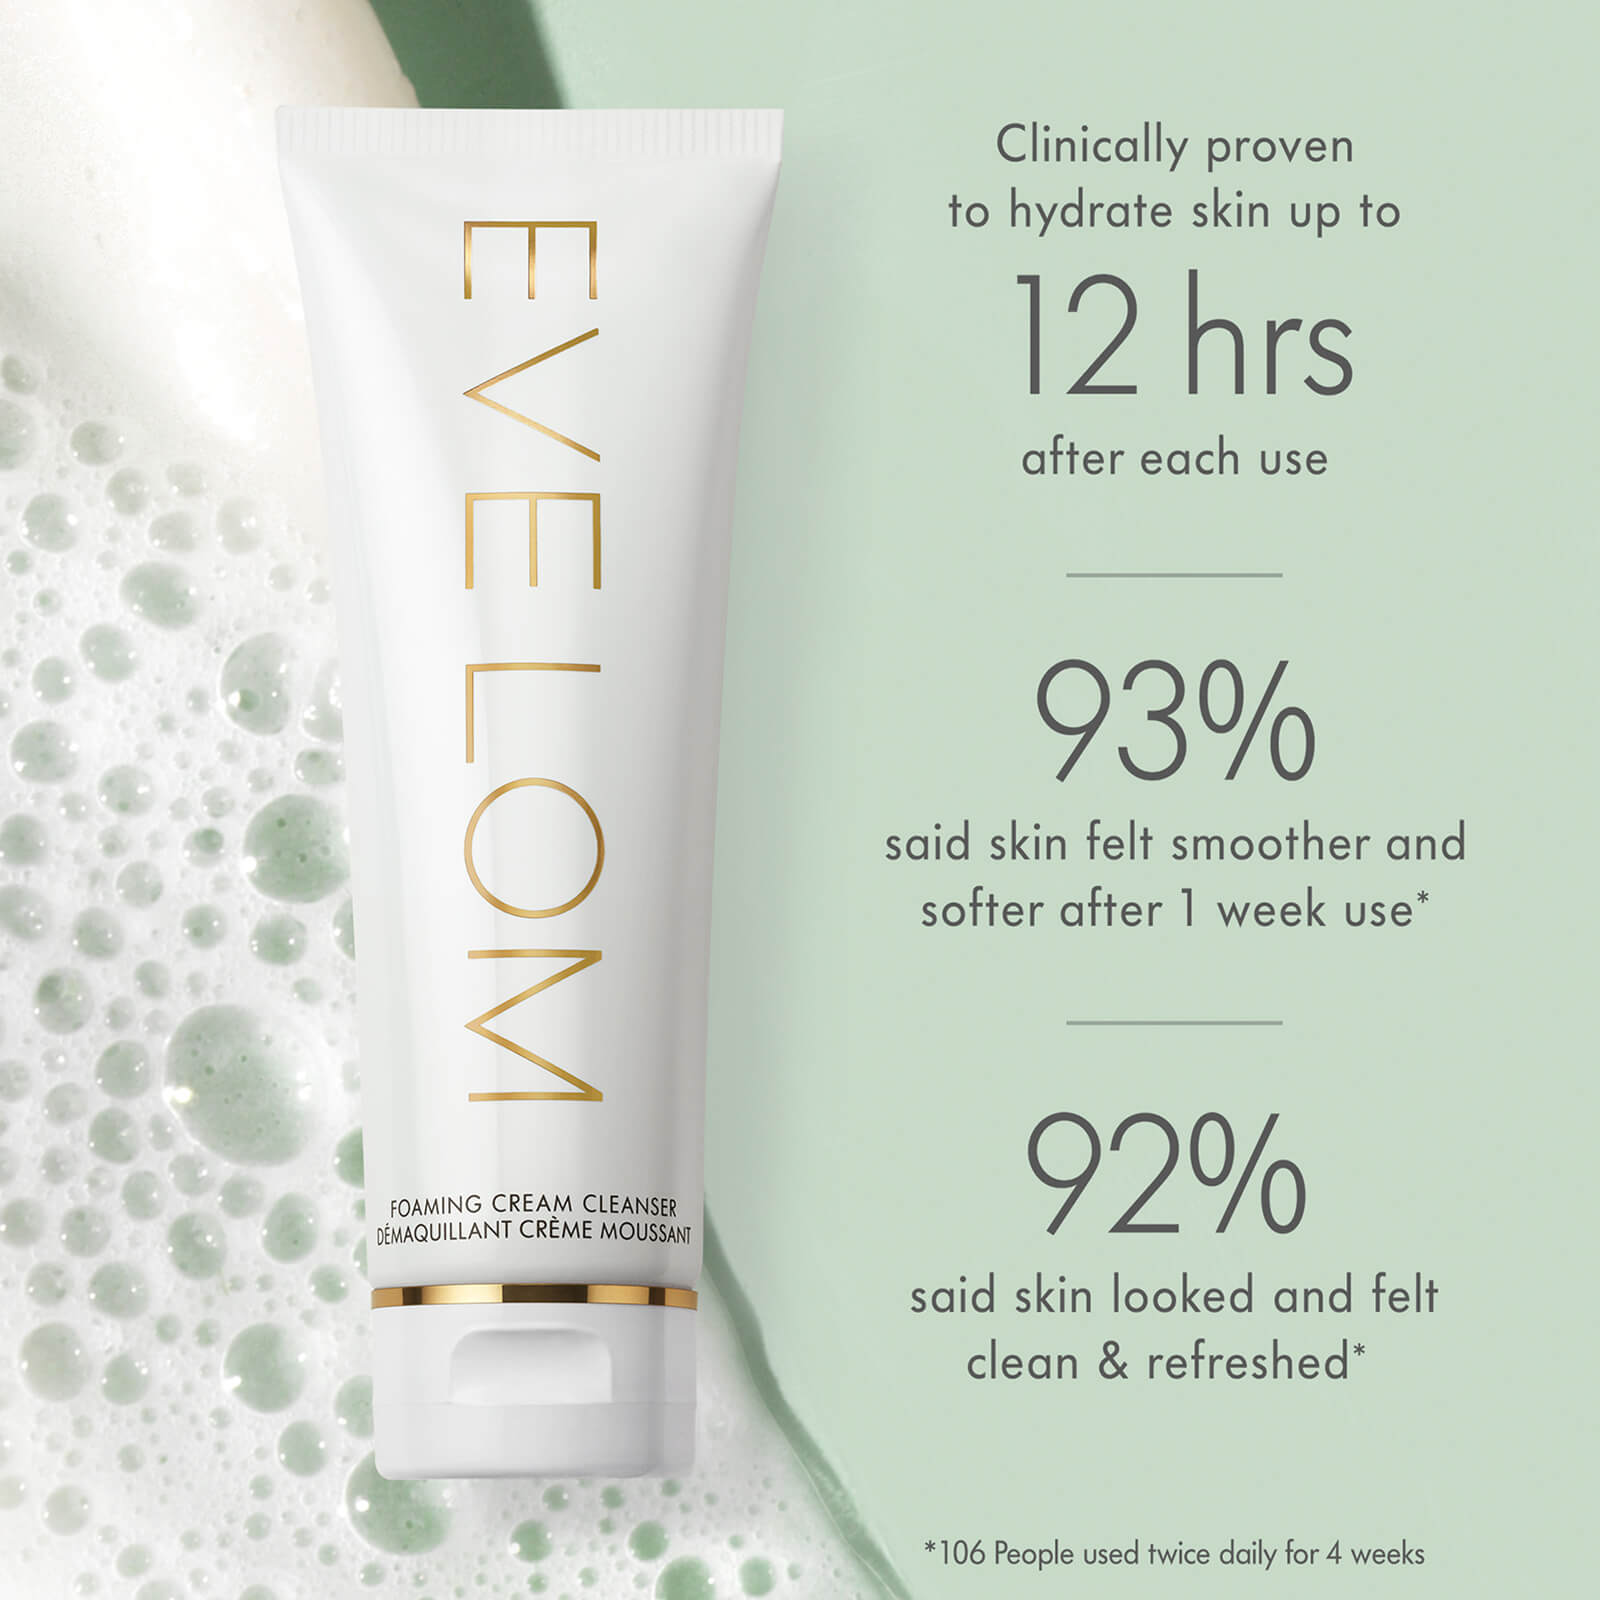 Clinically proven to hydrate skin up to 12 hours after each use. 93% said skin felt smoother and softer after 1 week use* 92% said skin looked and felt clean and refreshed* *106 people used twice daily for 4 weeks